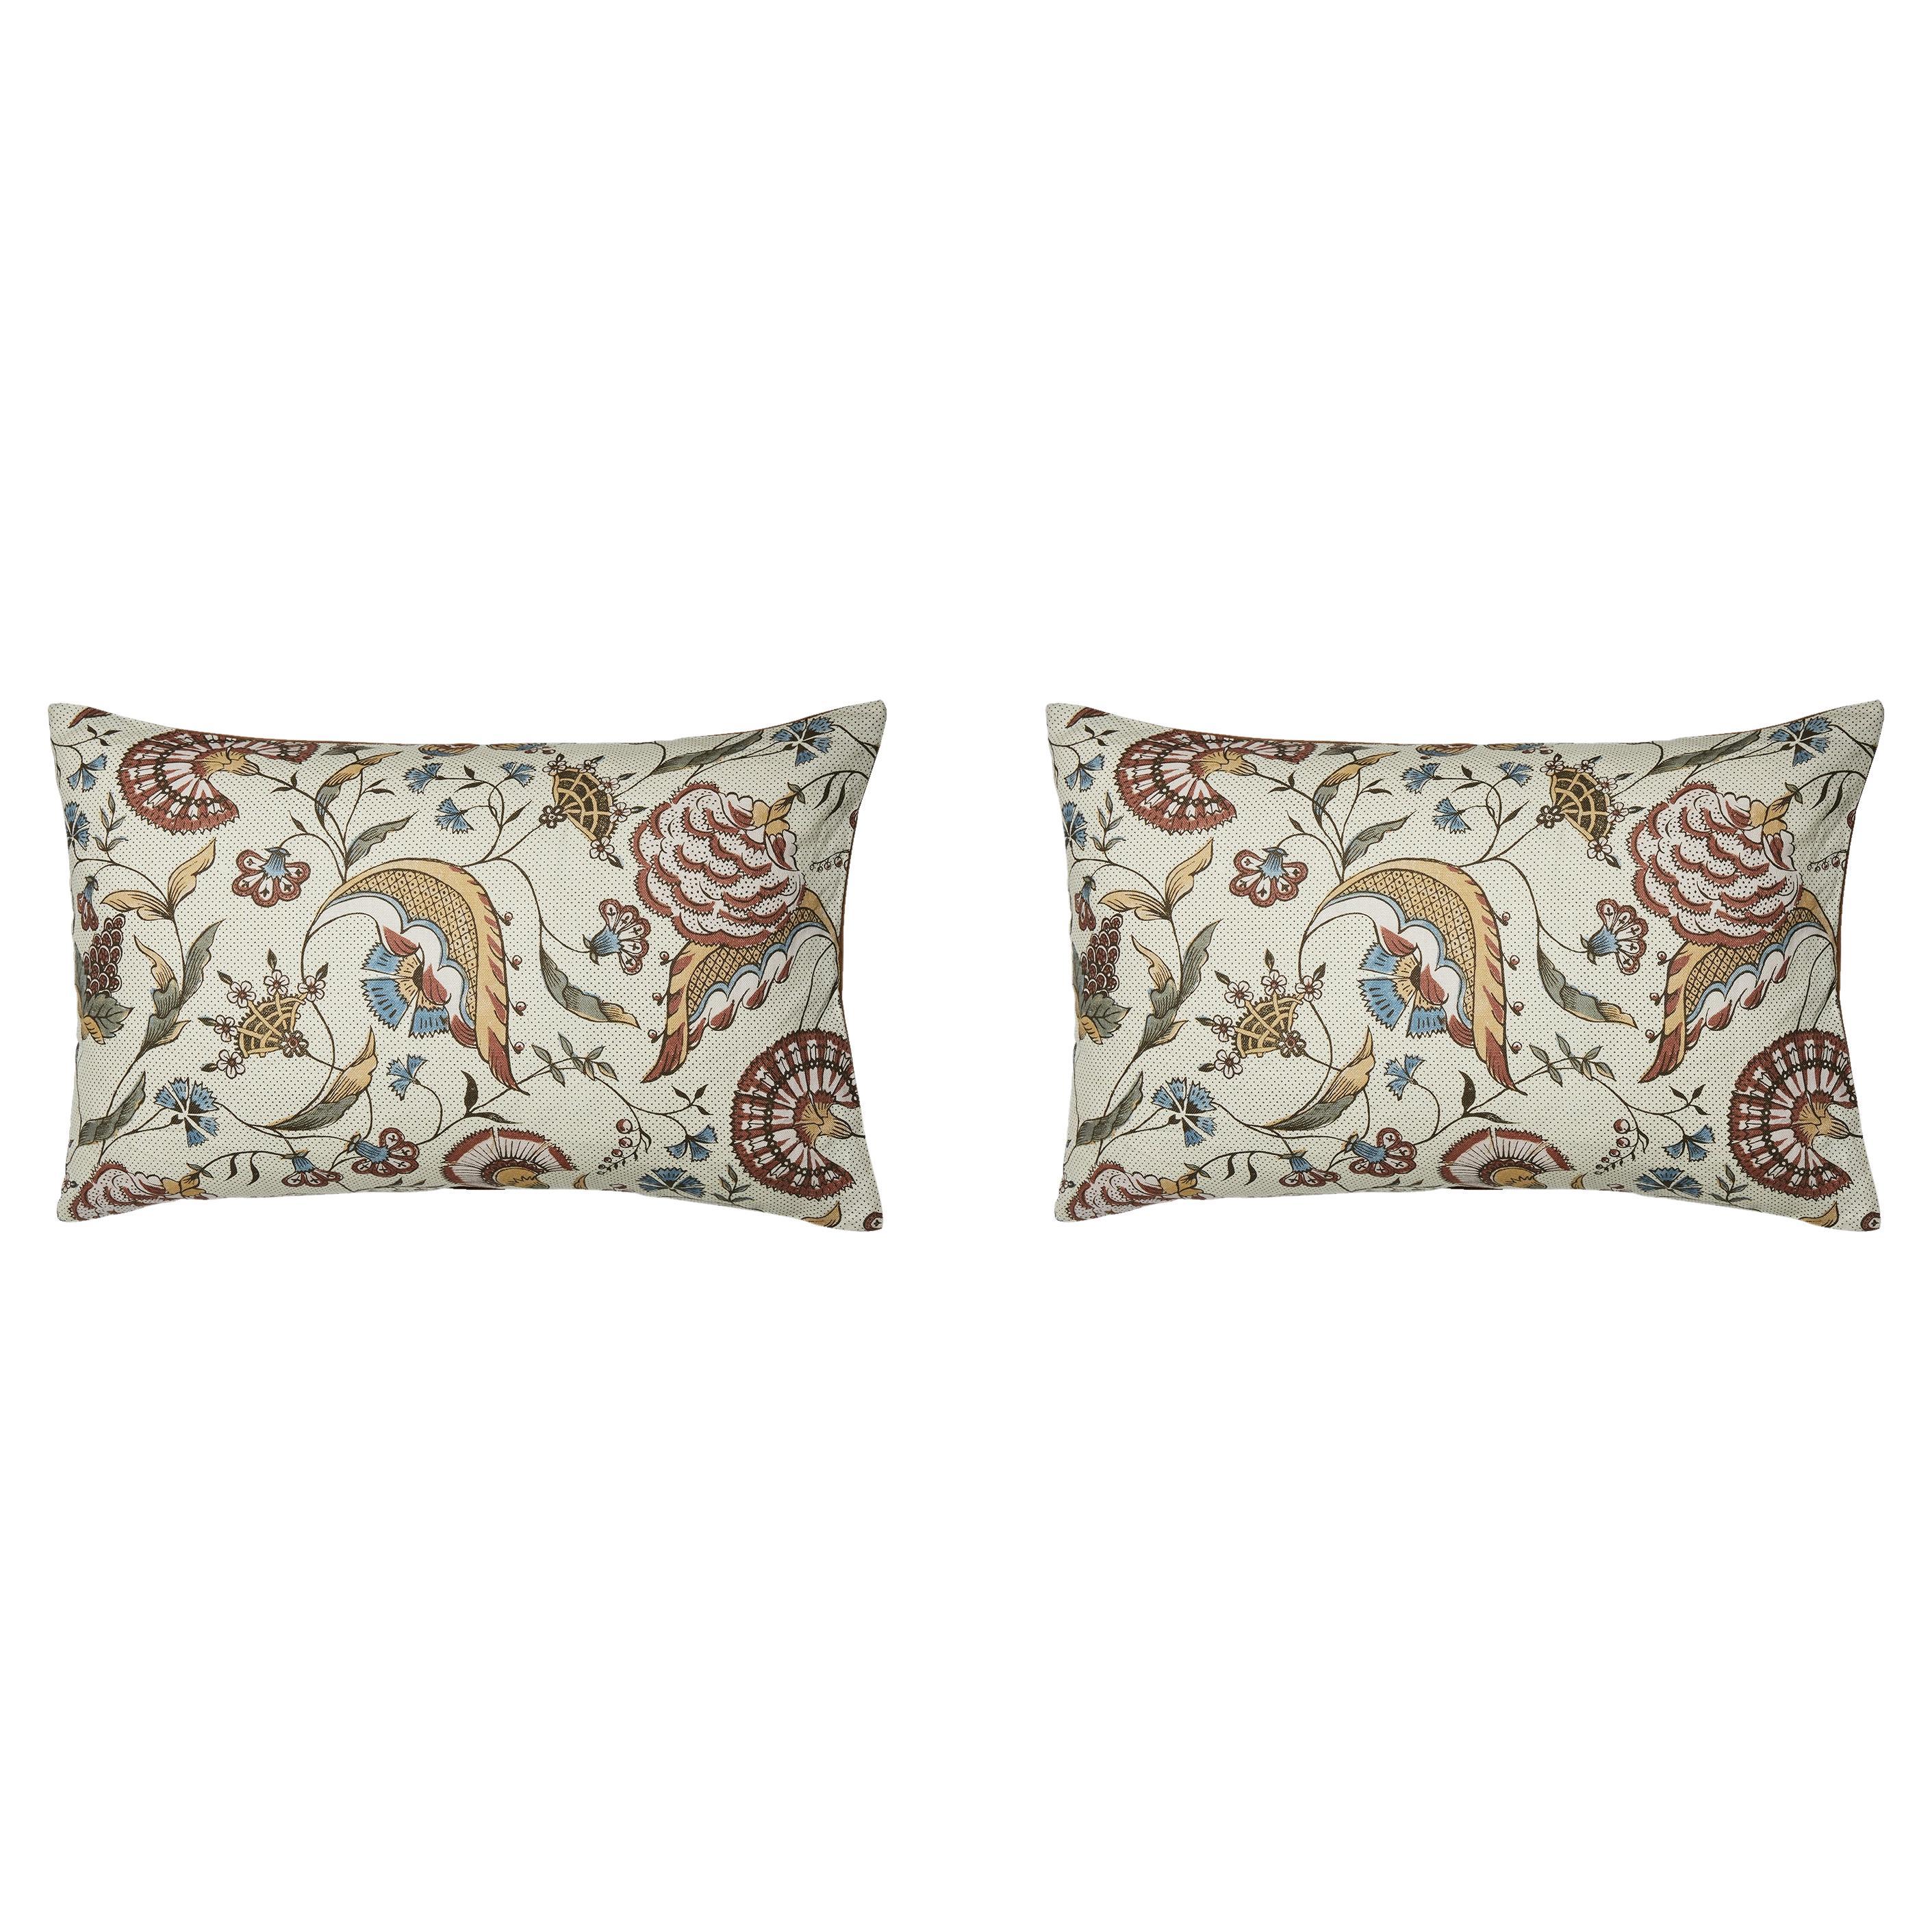 Pair of Linen Pillow Cushions - Jaipur pattern - Designed and Made in Paris